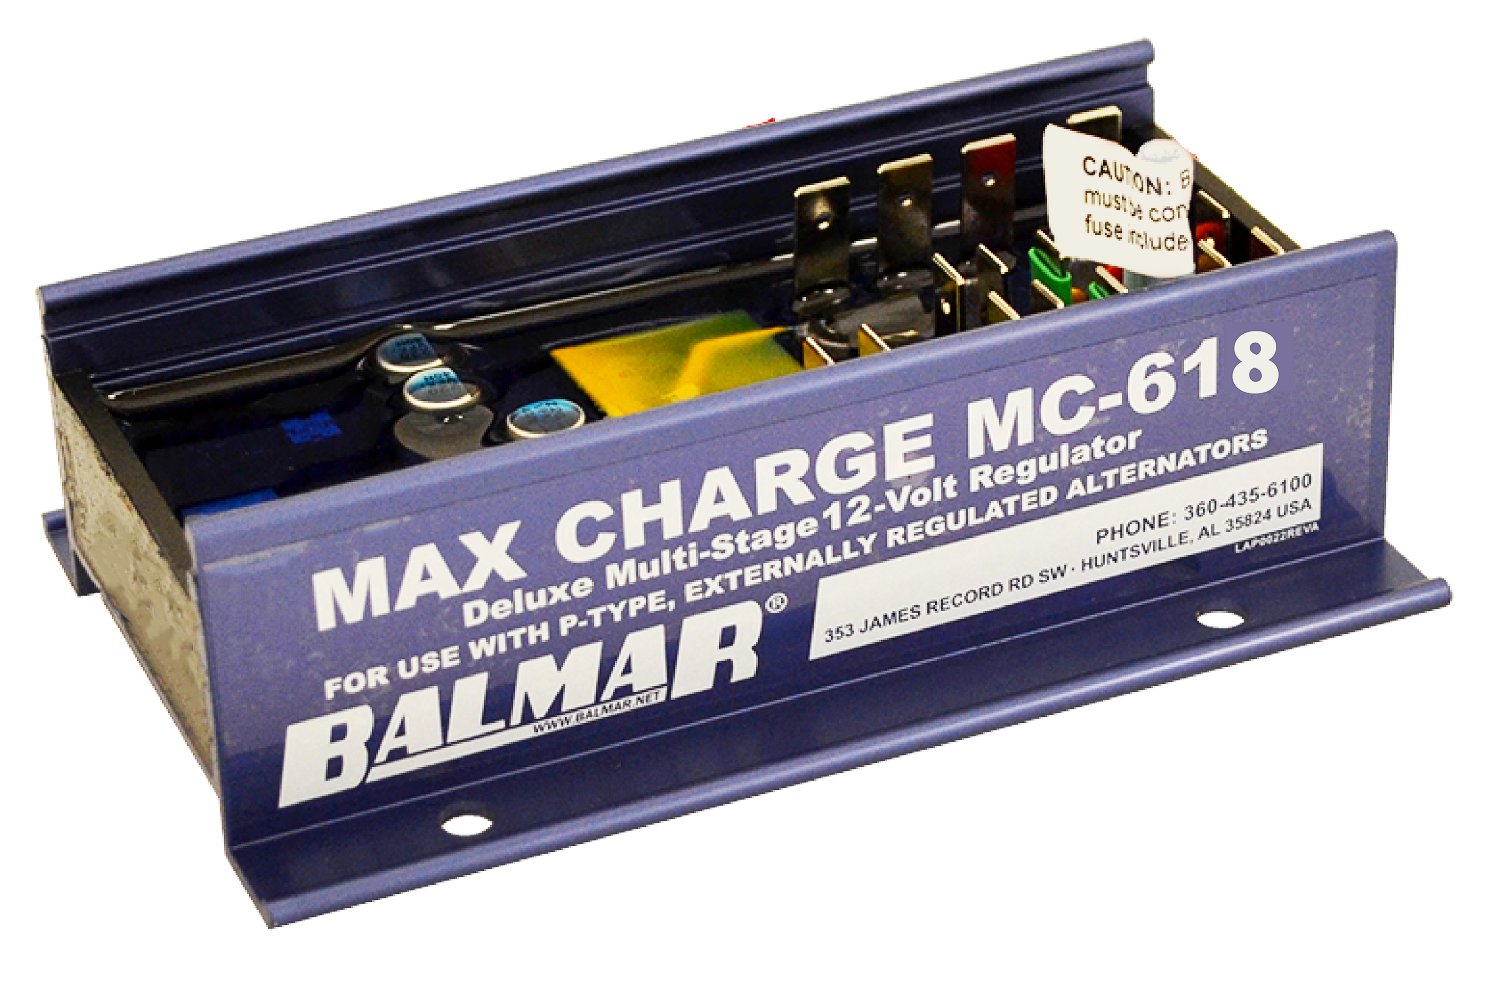 What are the steps to diagnose issues with a Balmar MC-618 12V Voltage Regulator?